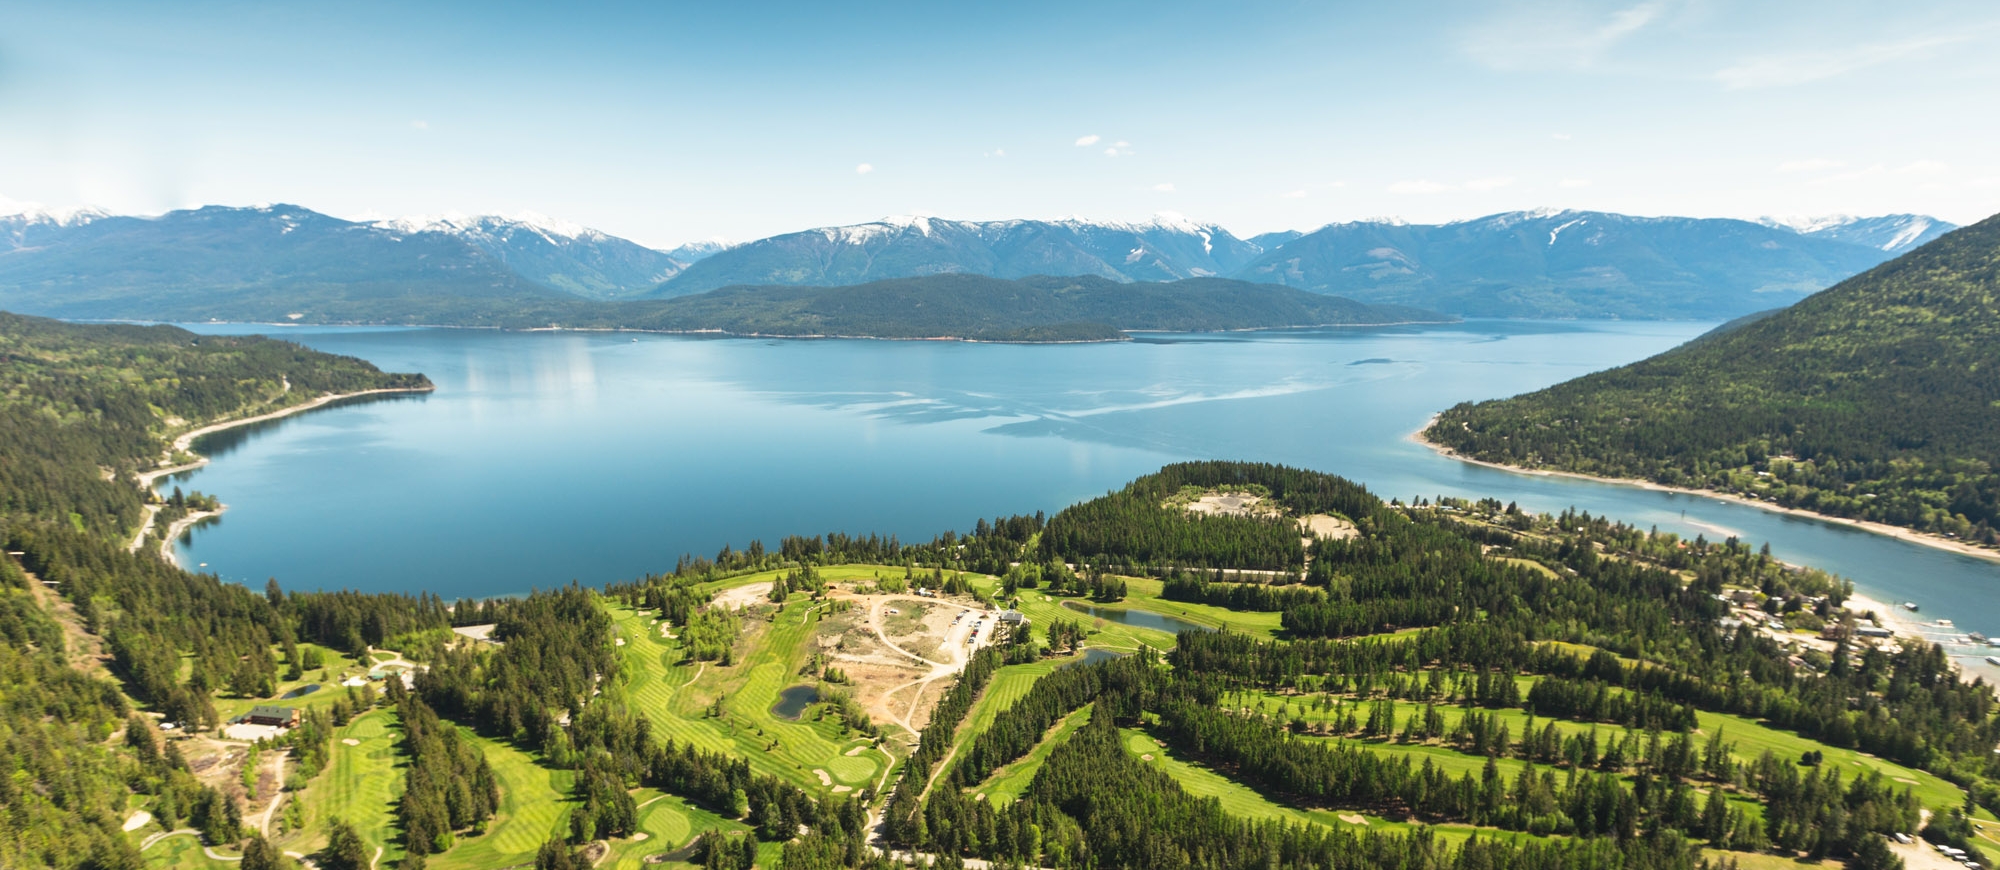 An aerial view of Balfour, BC, including Kootenay Lake and the golf courses.